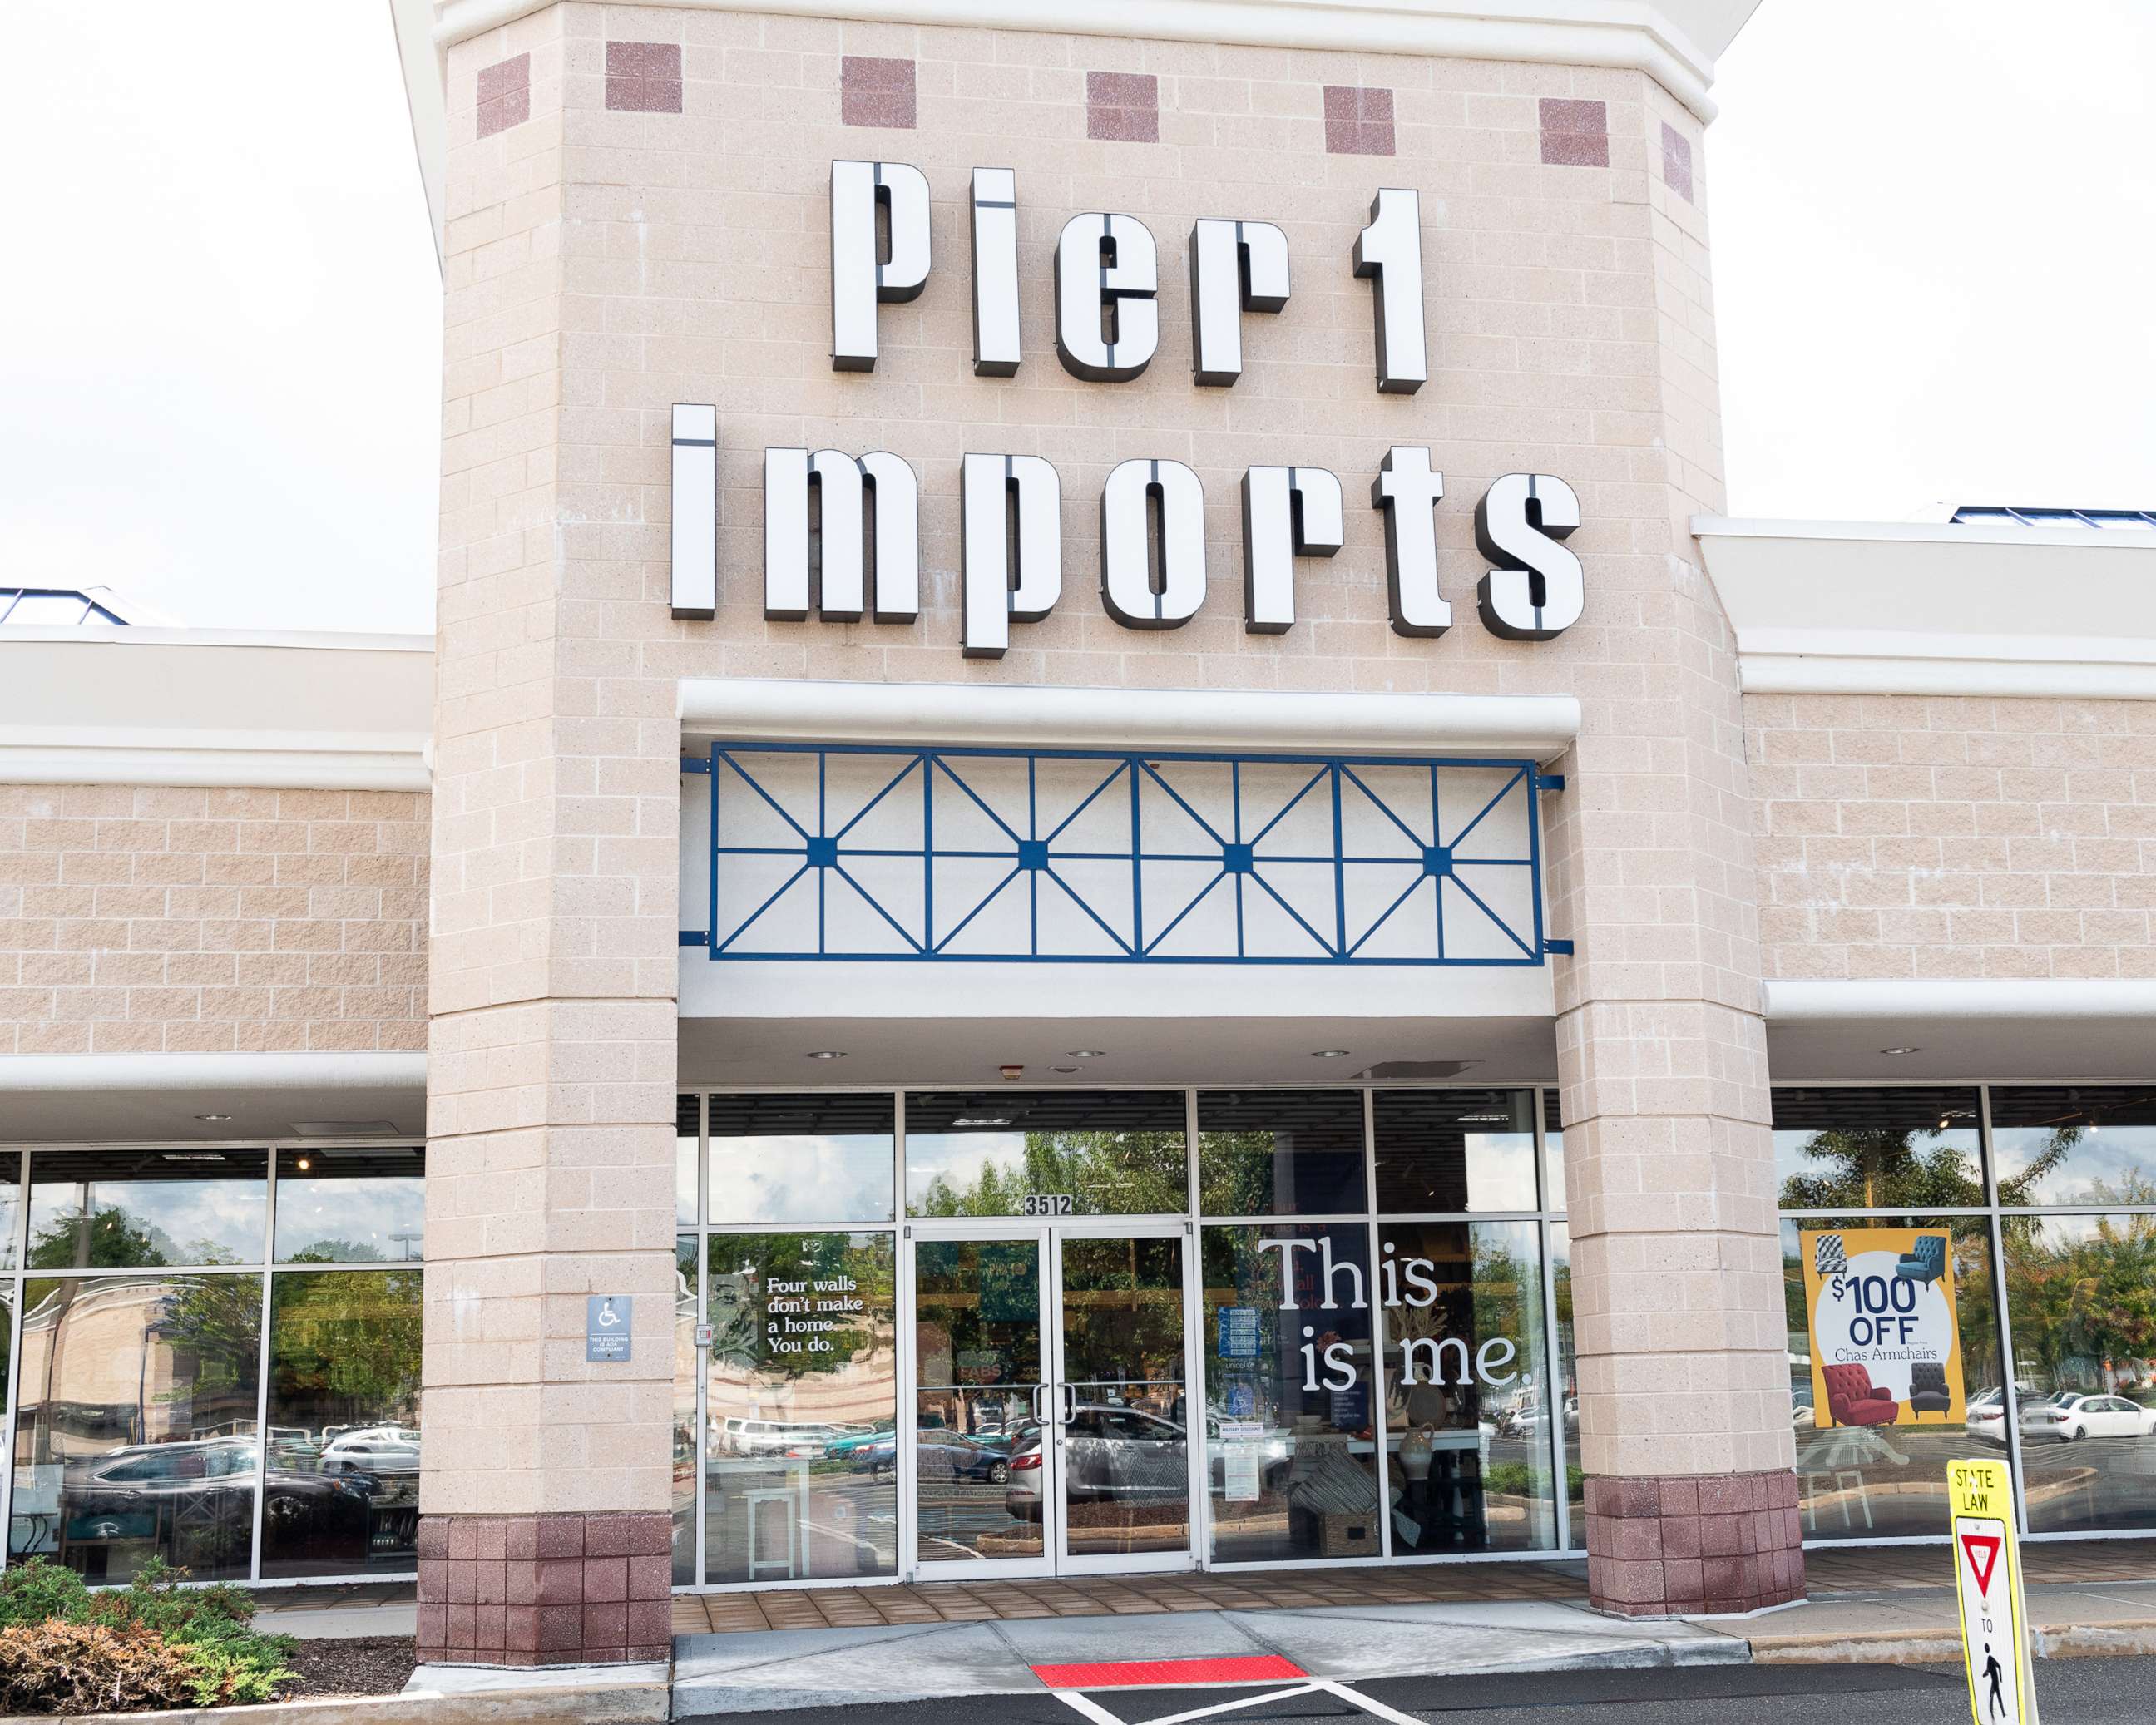 PHOTO: In this Aug. 14, 2018, file photo, a Pier 1 store in Princeton, NJ. is shown.